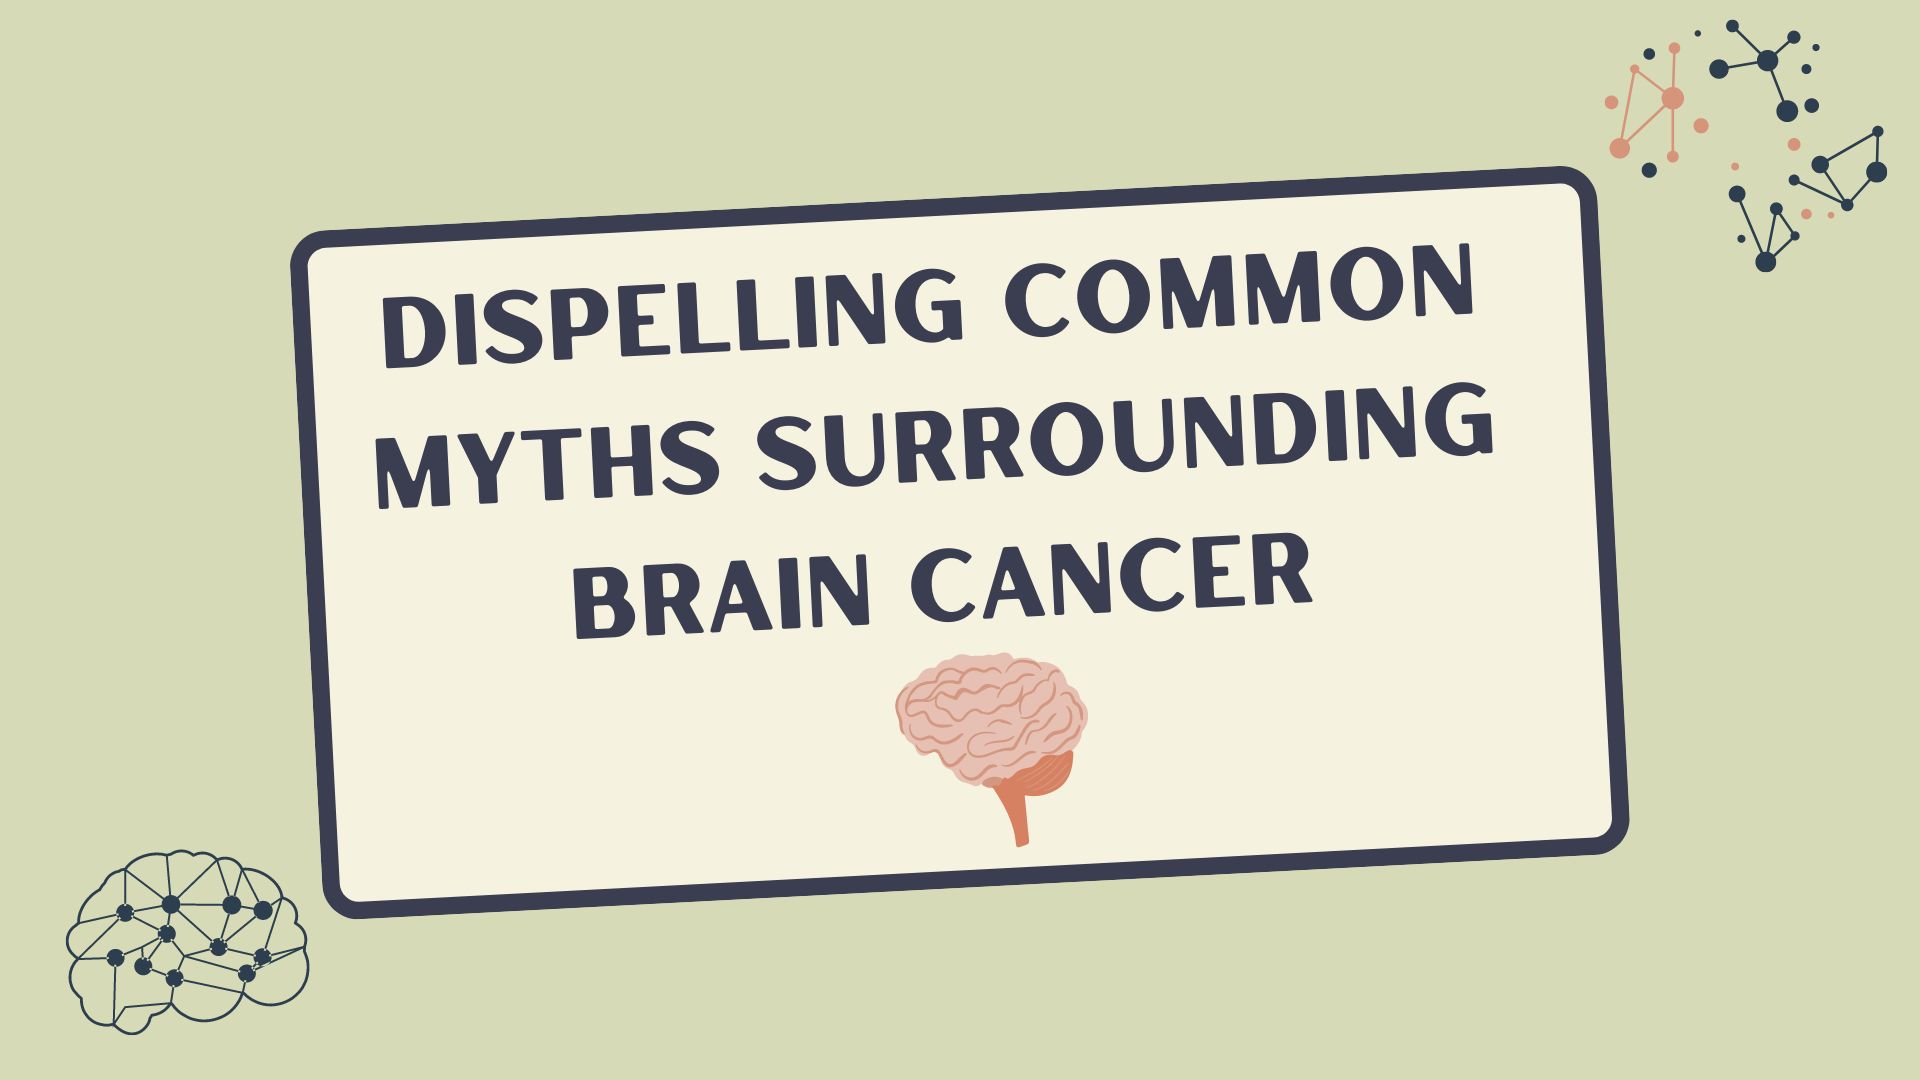 Dispelling Common Myths Surrounding Brain Cancer